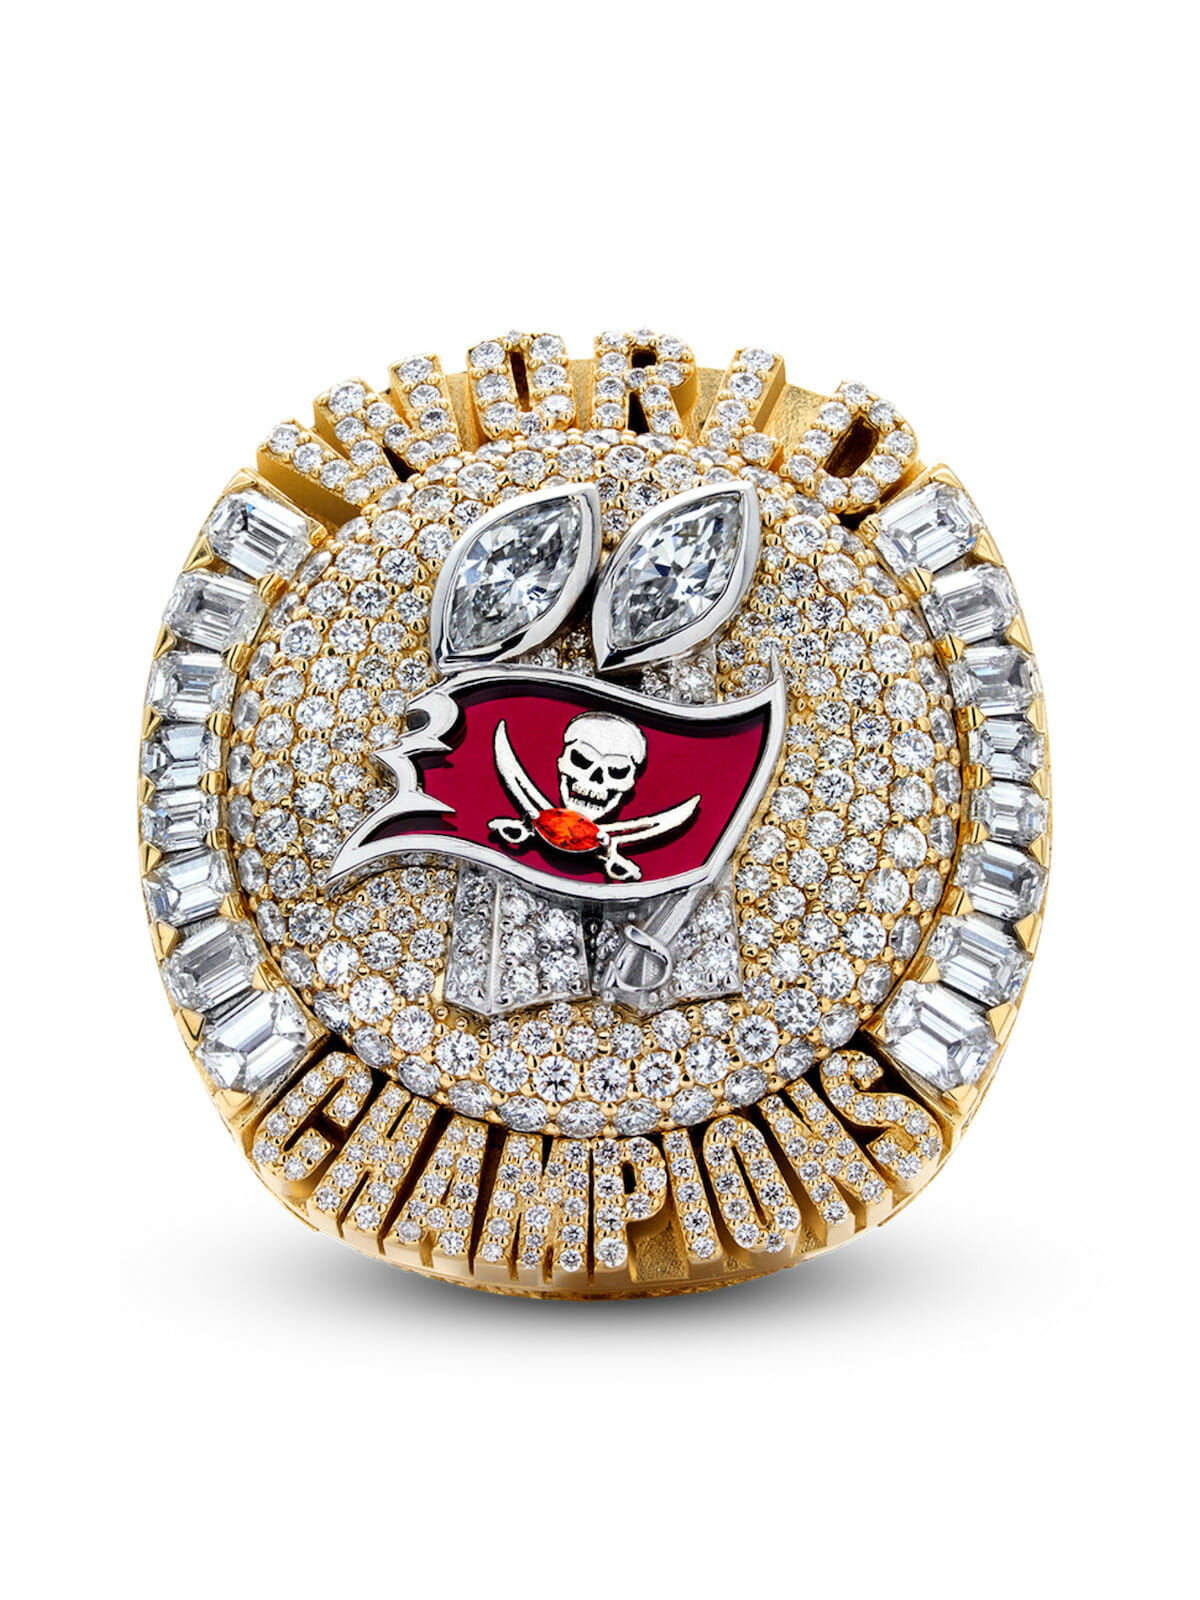 Top of the Tampa Bay Buccaneers Super Bowl Ring